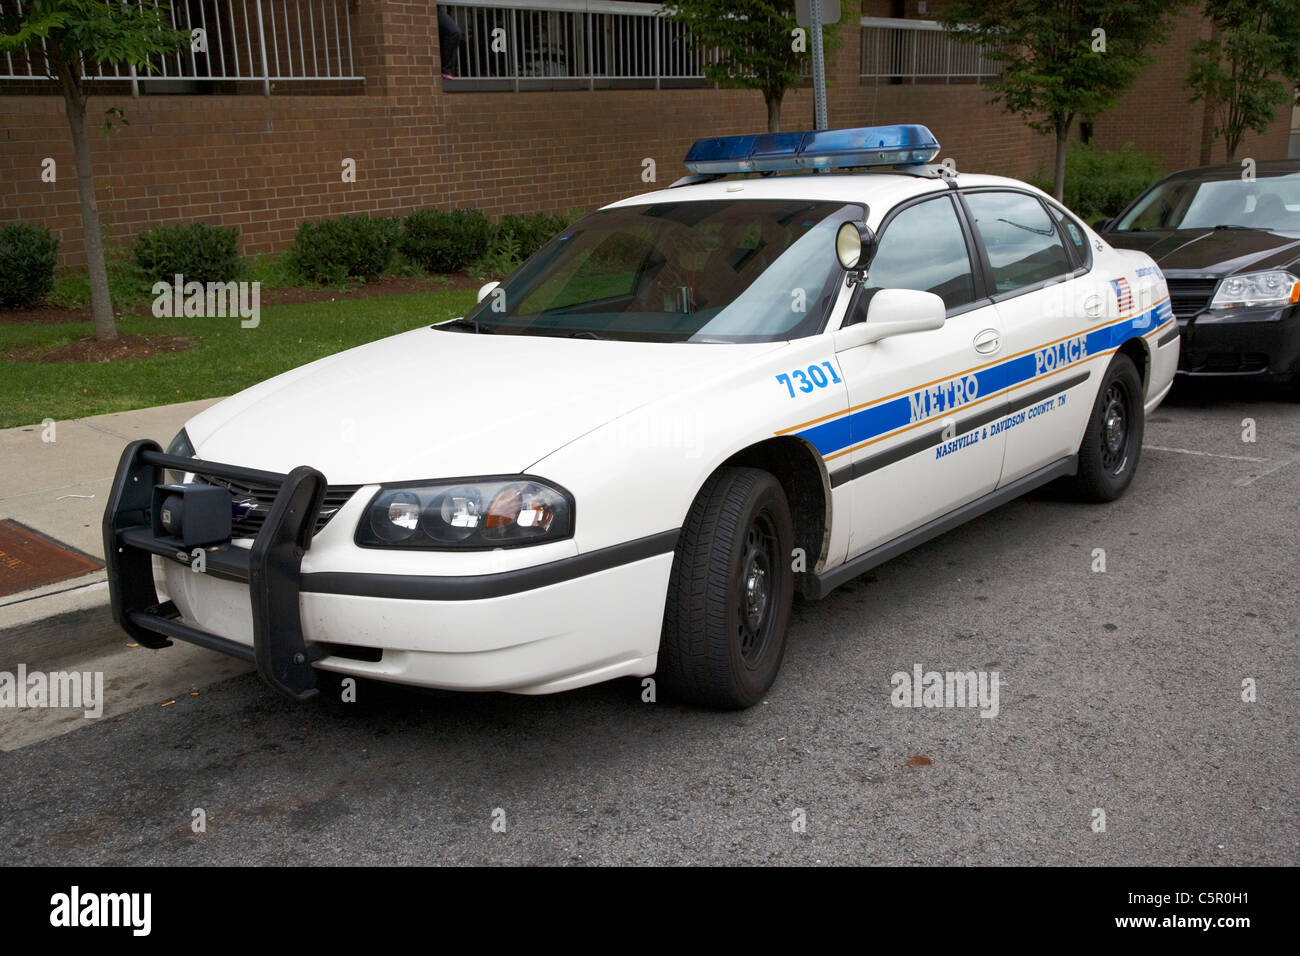 bullbars and speaker on the front of a metro police squad car davidson county Nashville Tennessee USA Stock Photo